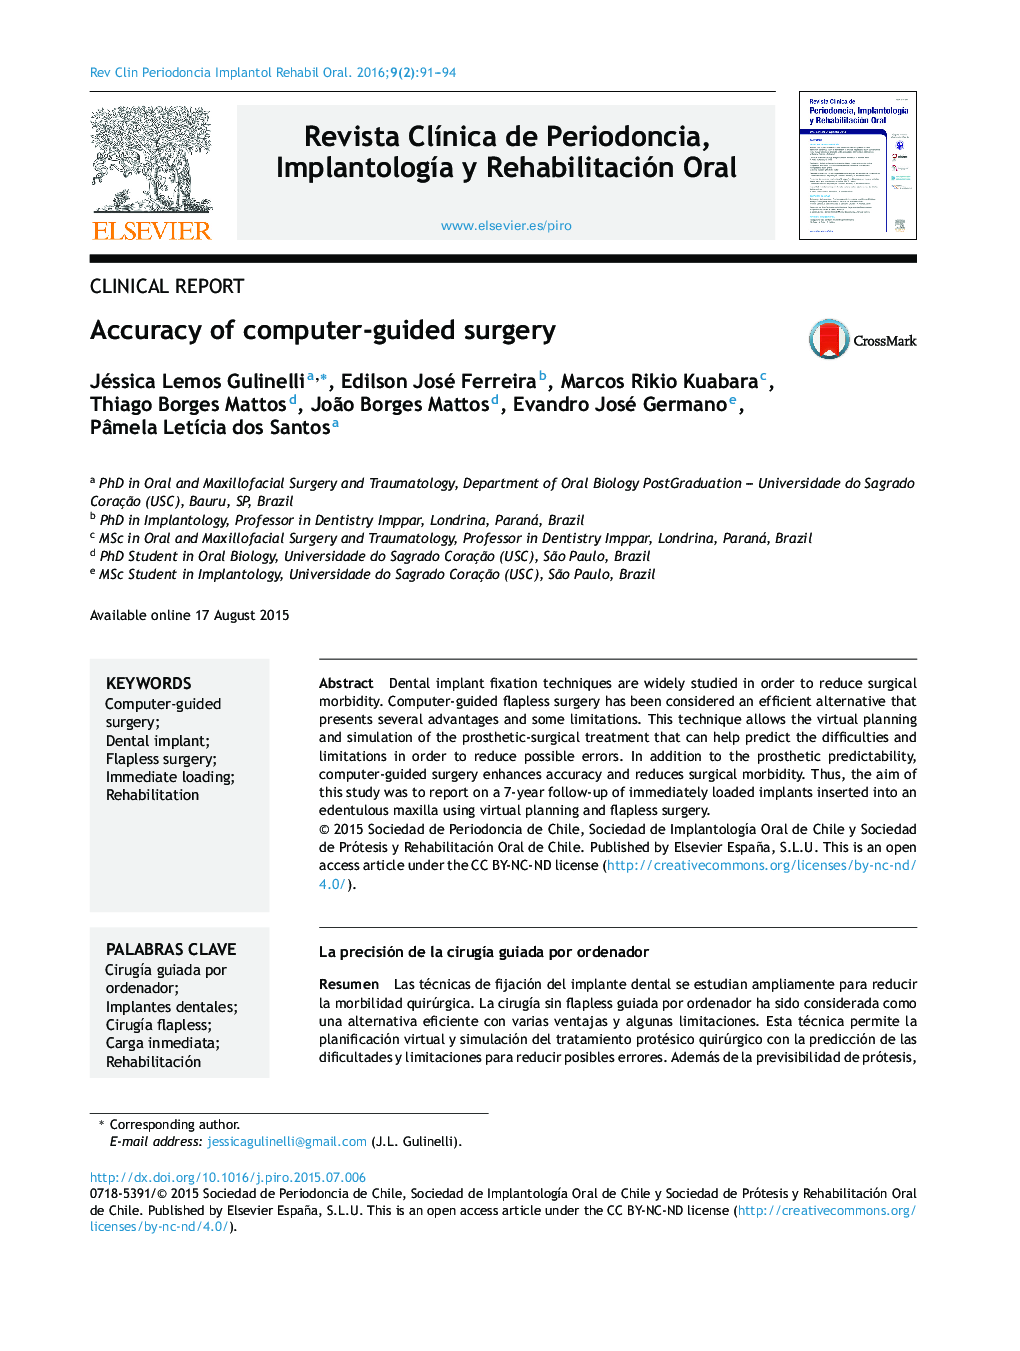 Accuracy of computer-guided surgery